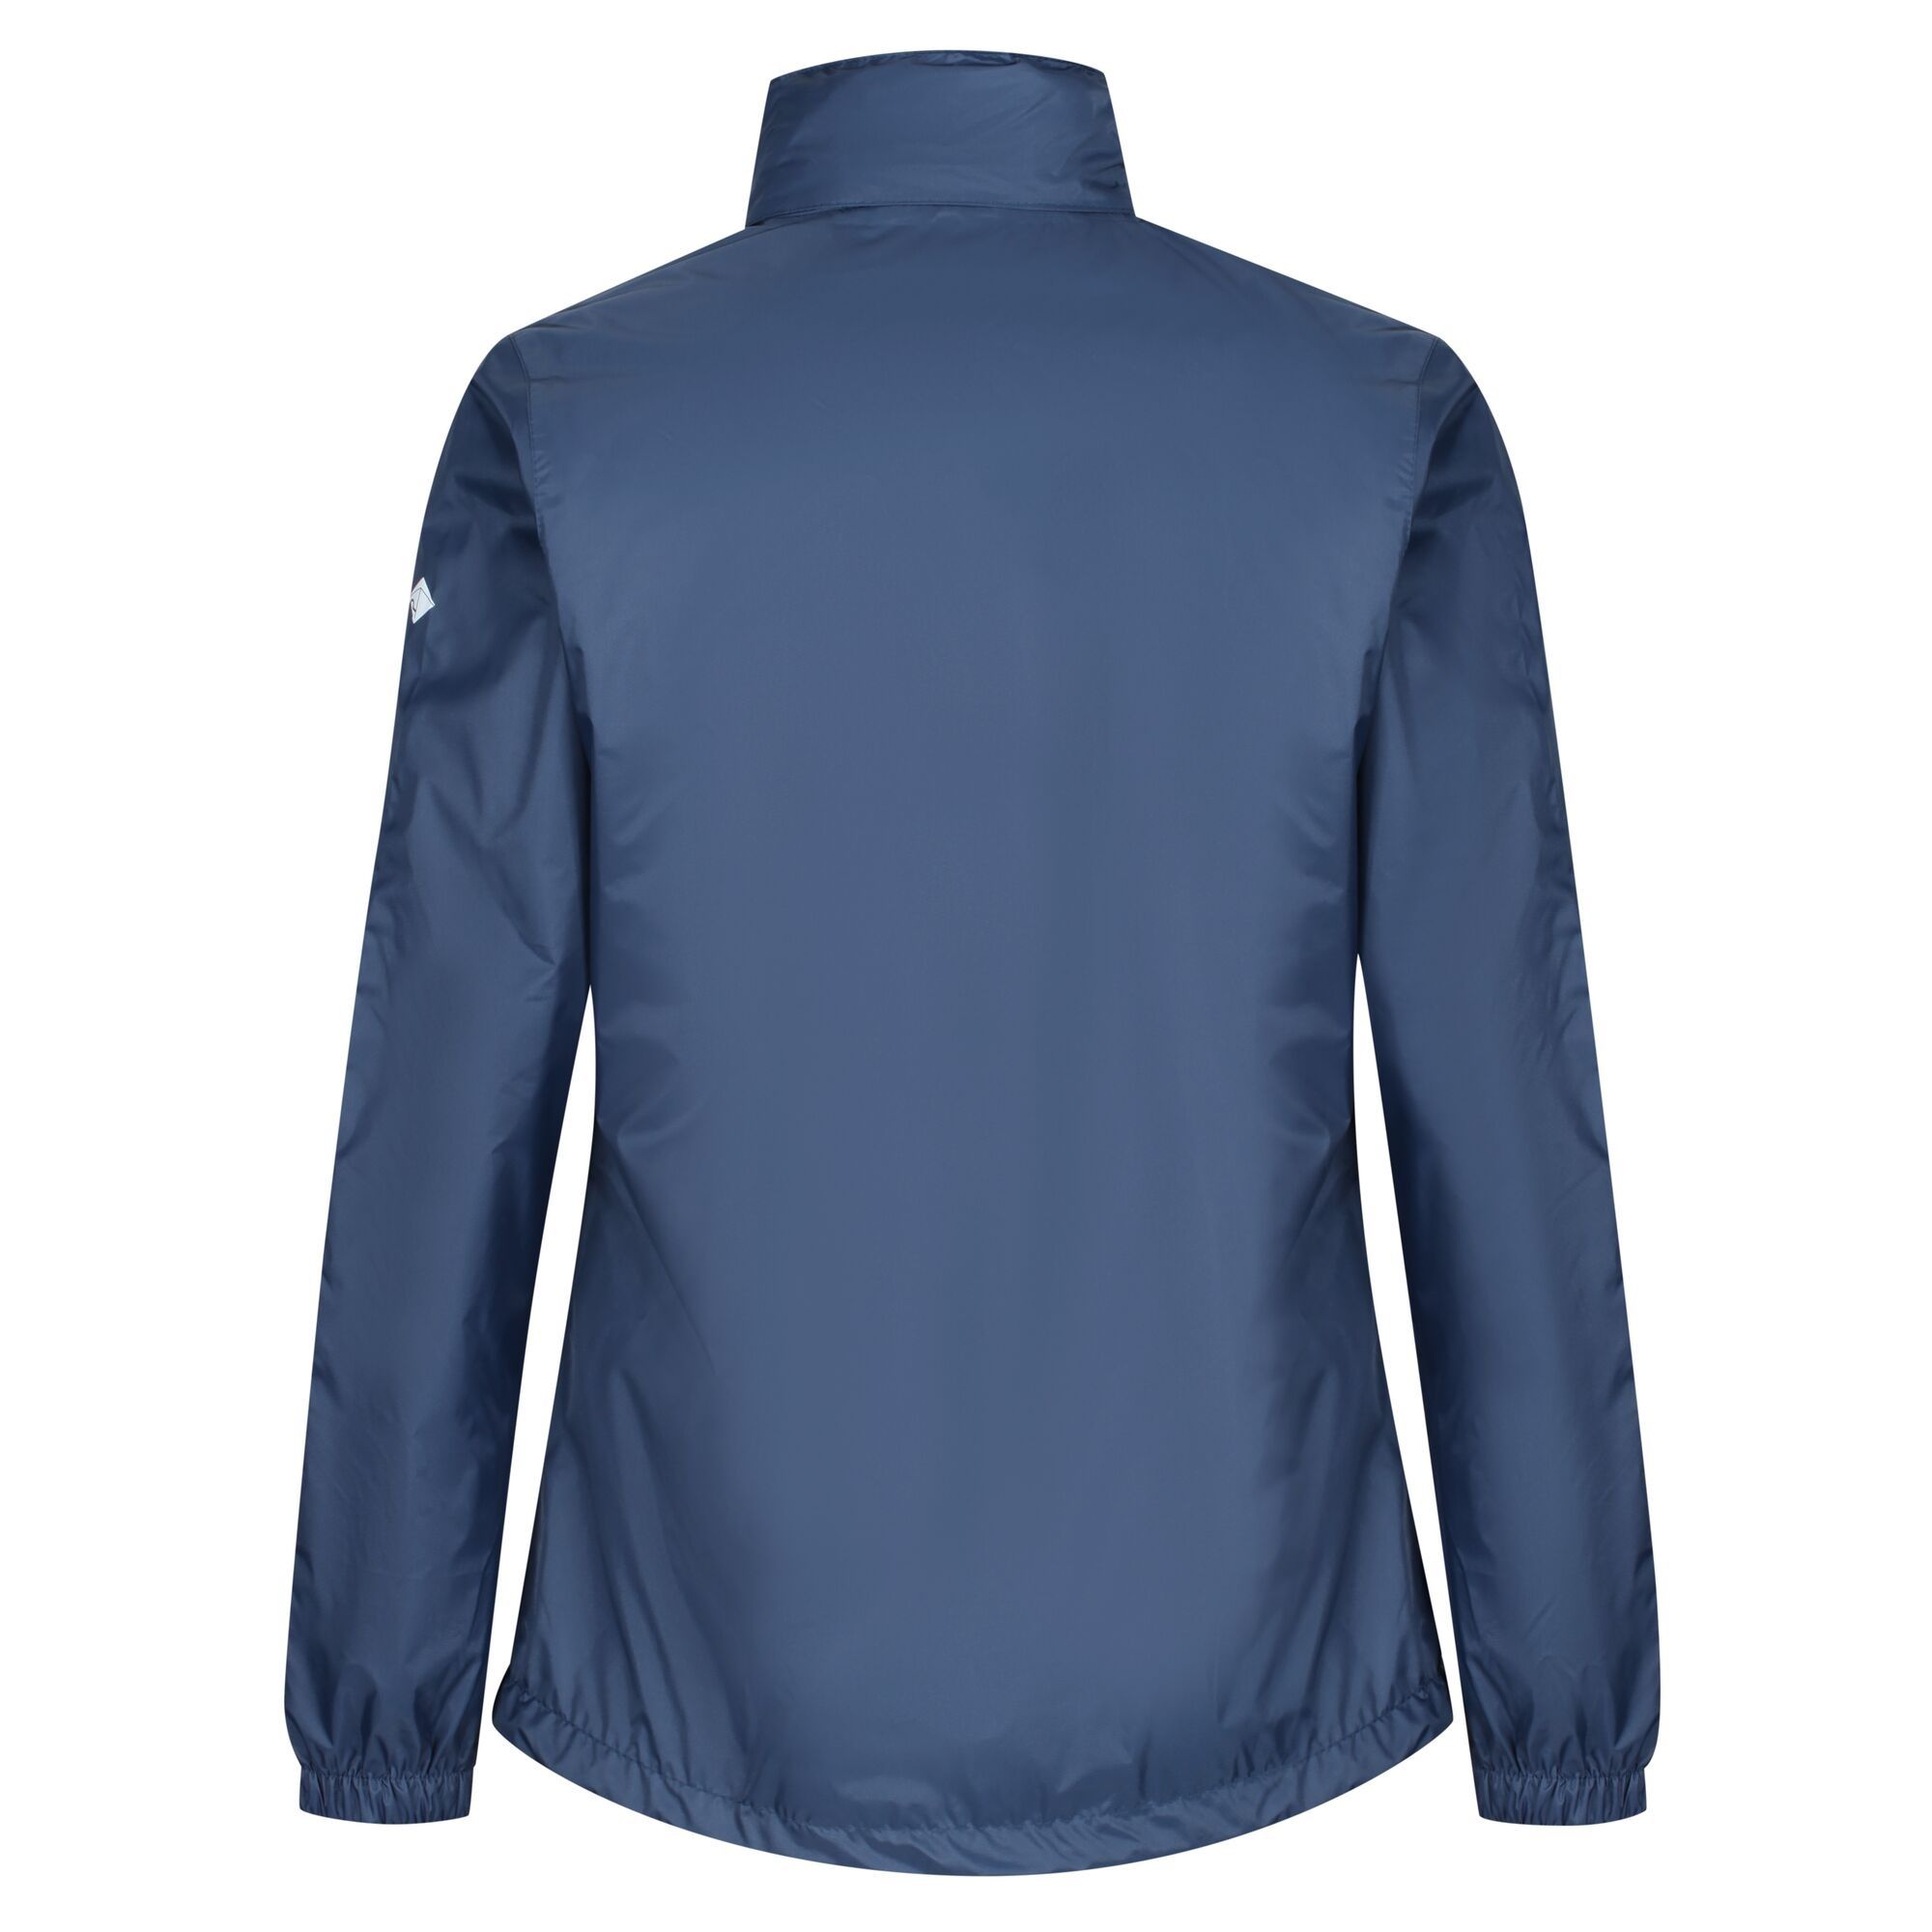 100% Polyamide. Super lightweight and packable waterproof jacket with soft mesh lining. ISOLITE 5,000 polyamide fabric with a durable water repellent finish. Sealed seams. Adjustable hem and hood. Size Guide (Bust): 6 UK: 30in, 8 UK: 32in, 10 UK: 34in, 12 UK: 36in, 14 UK: 38in, 16 UK: 40in, 18 UK: 43in, 20 UK: 44in, 22 UK: 48in, 24 UK: 50in, 26 UK: 52in.